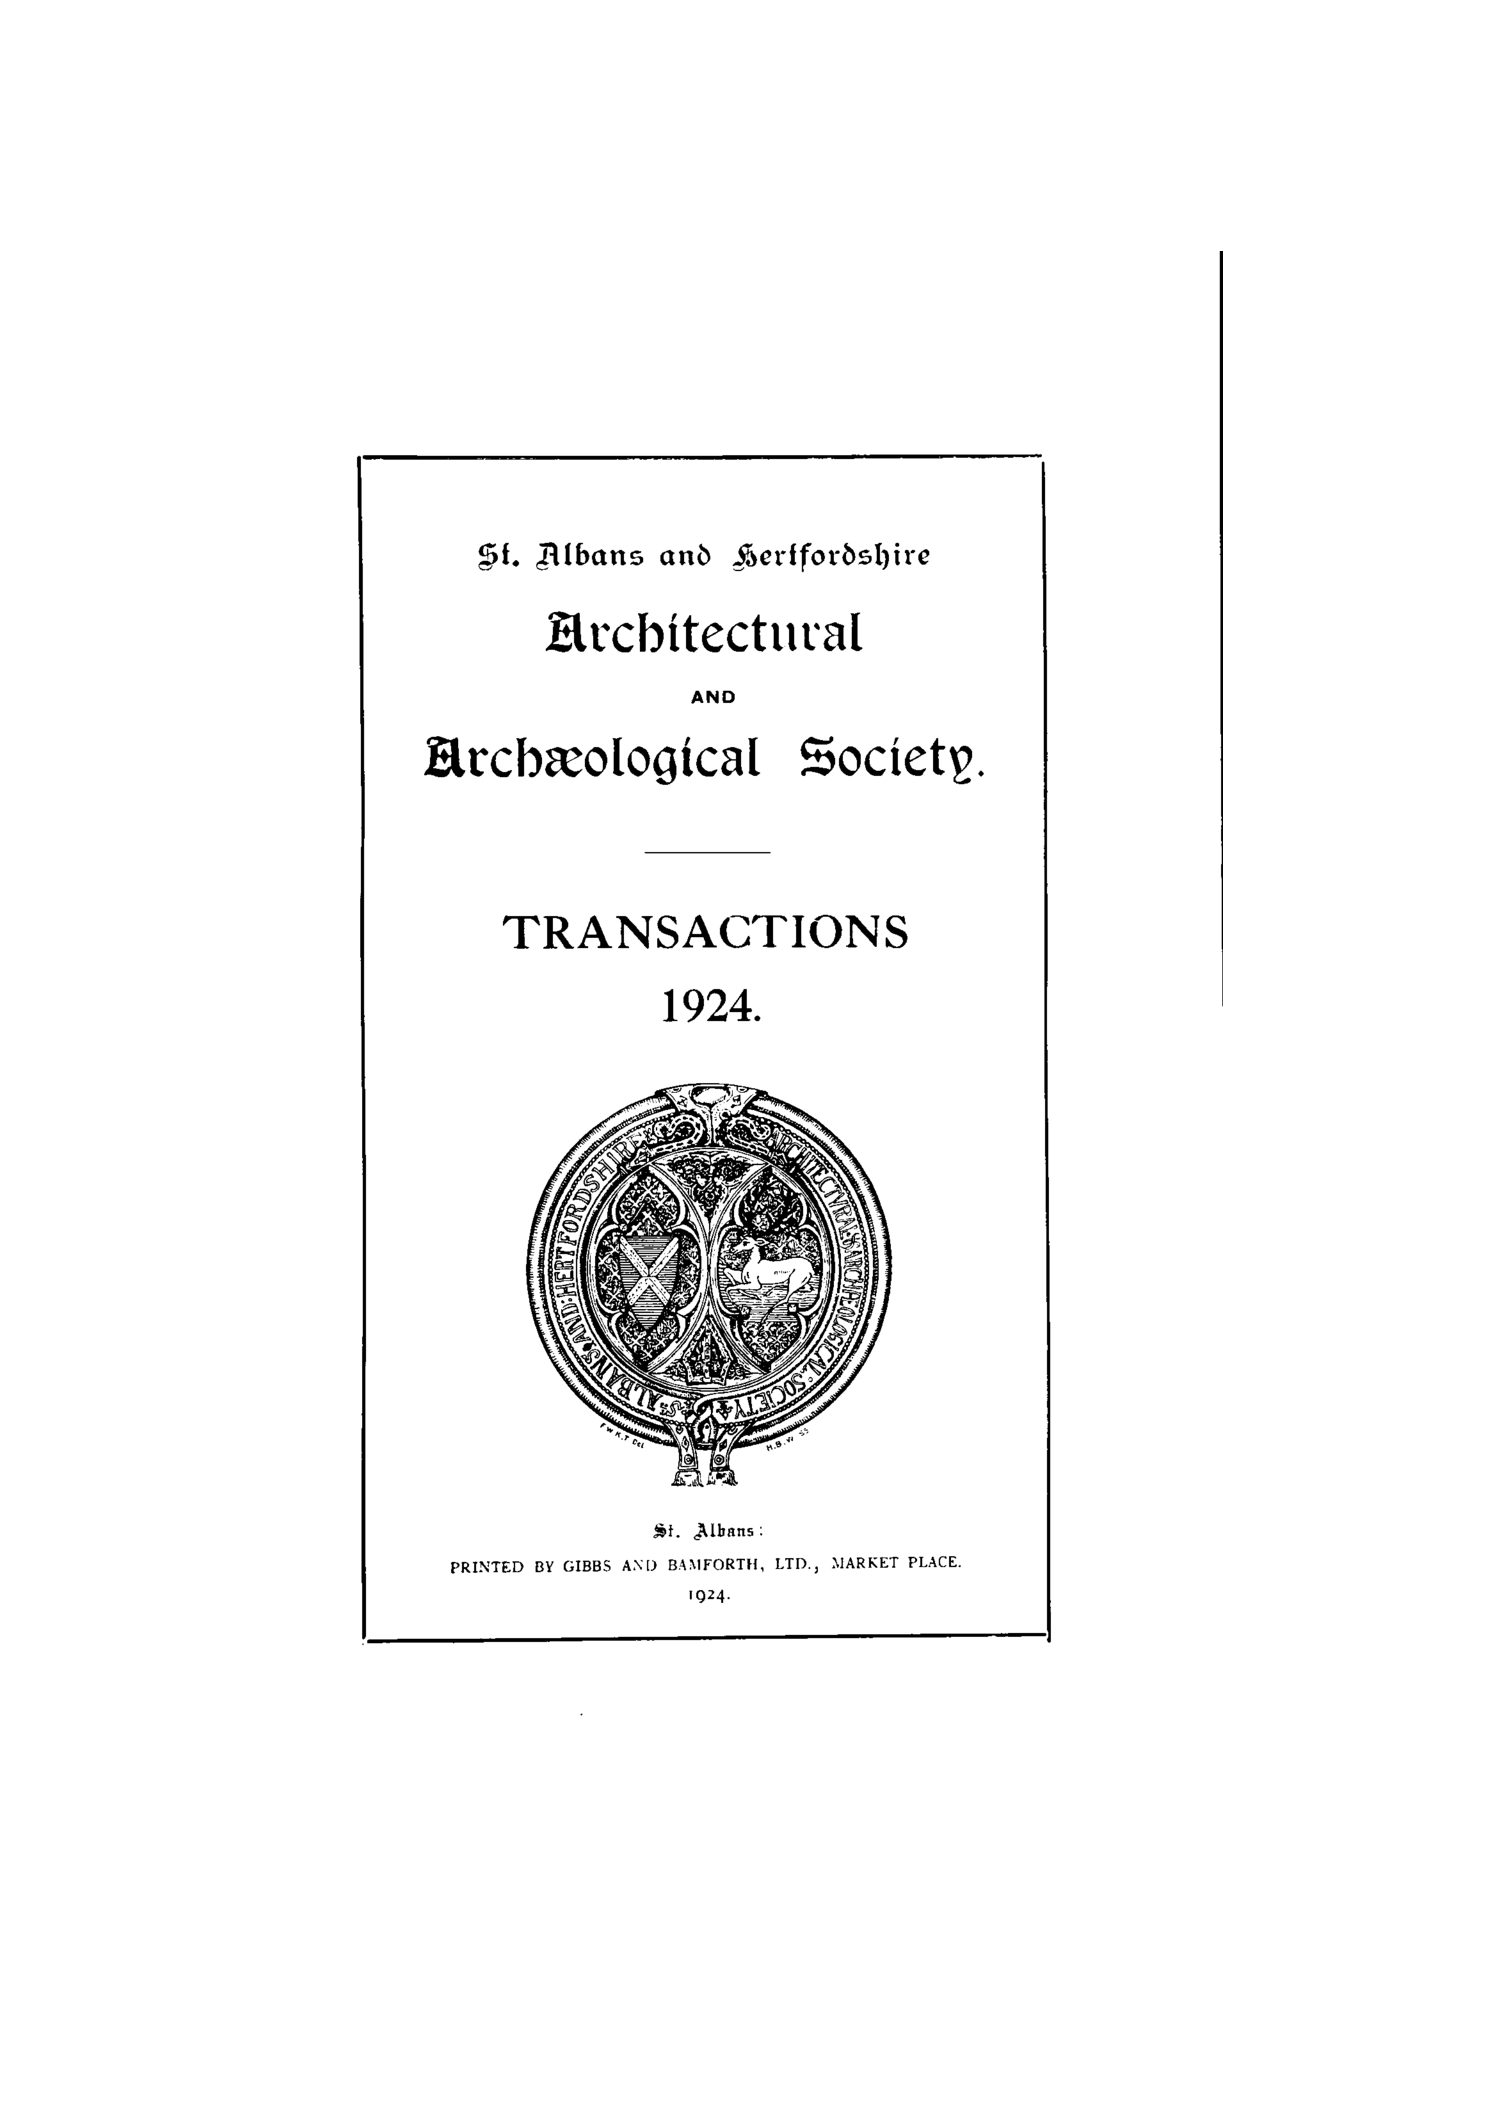 Transactions of the Society (1924)